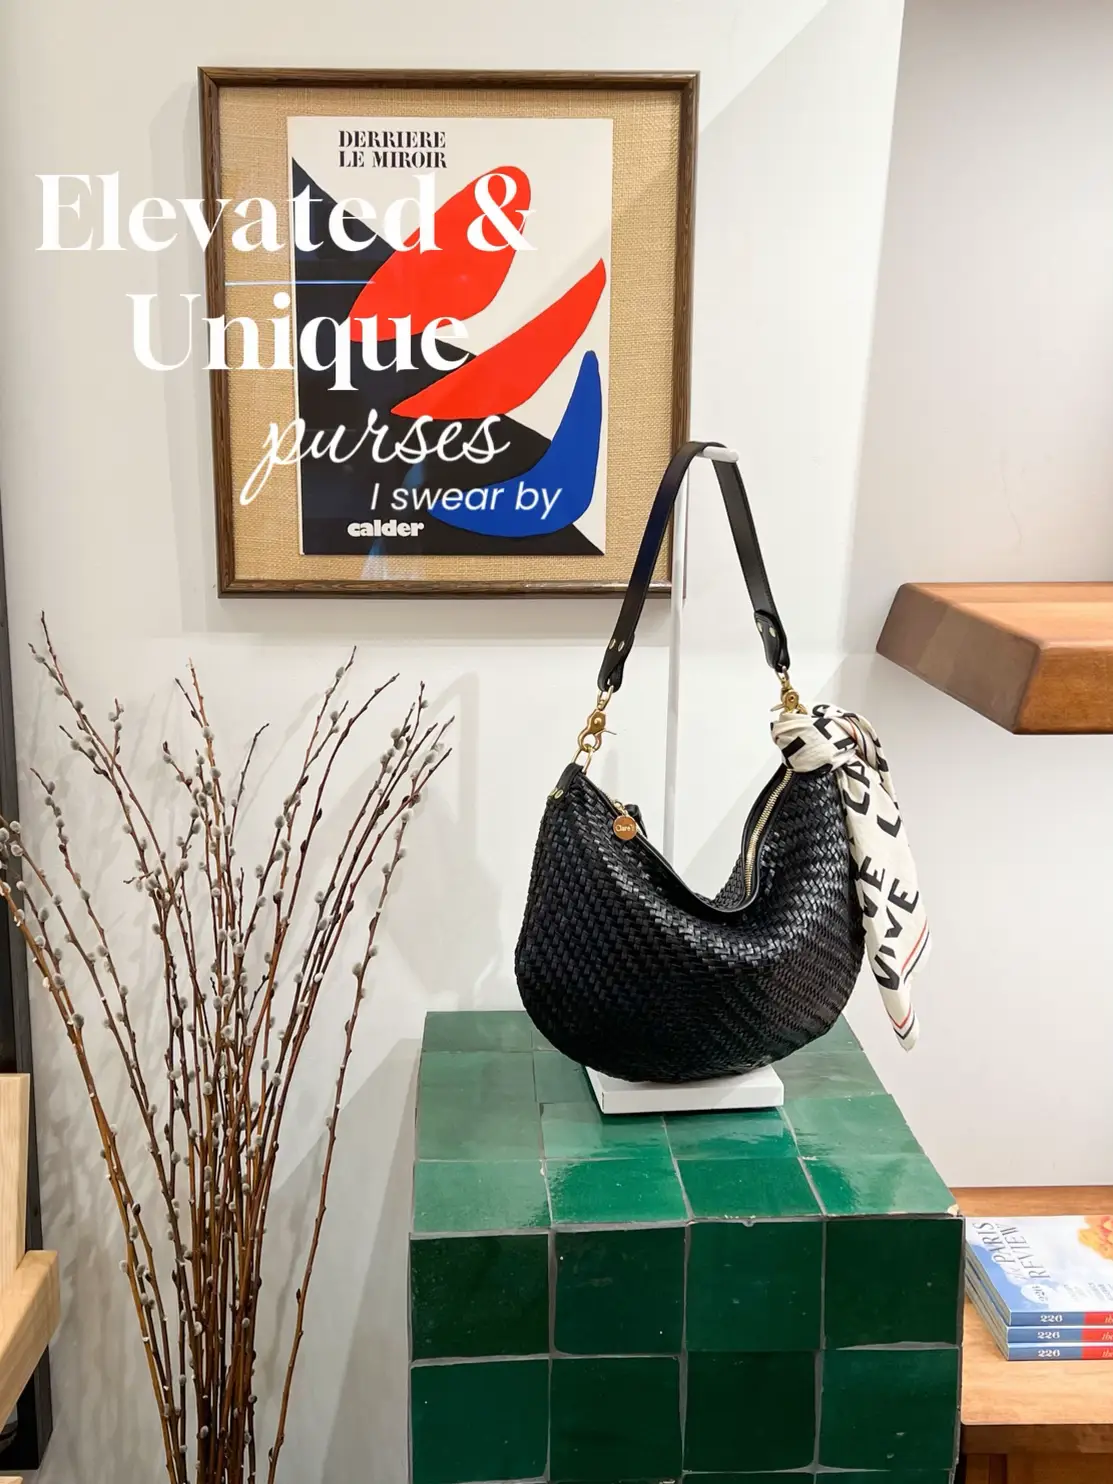 Get a Parisian-Inspired Handbag at the Clare V. Pop-up in Lincoln Park –  Chicago Magazine